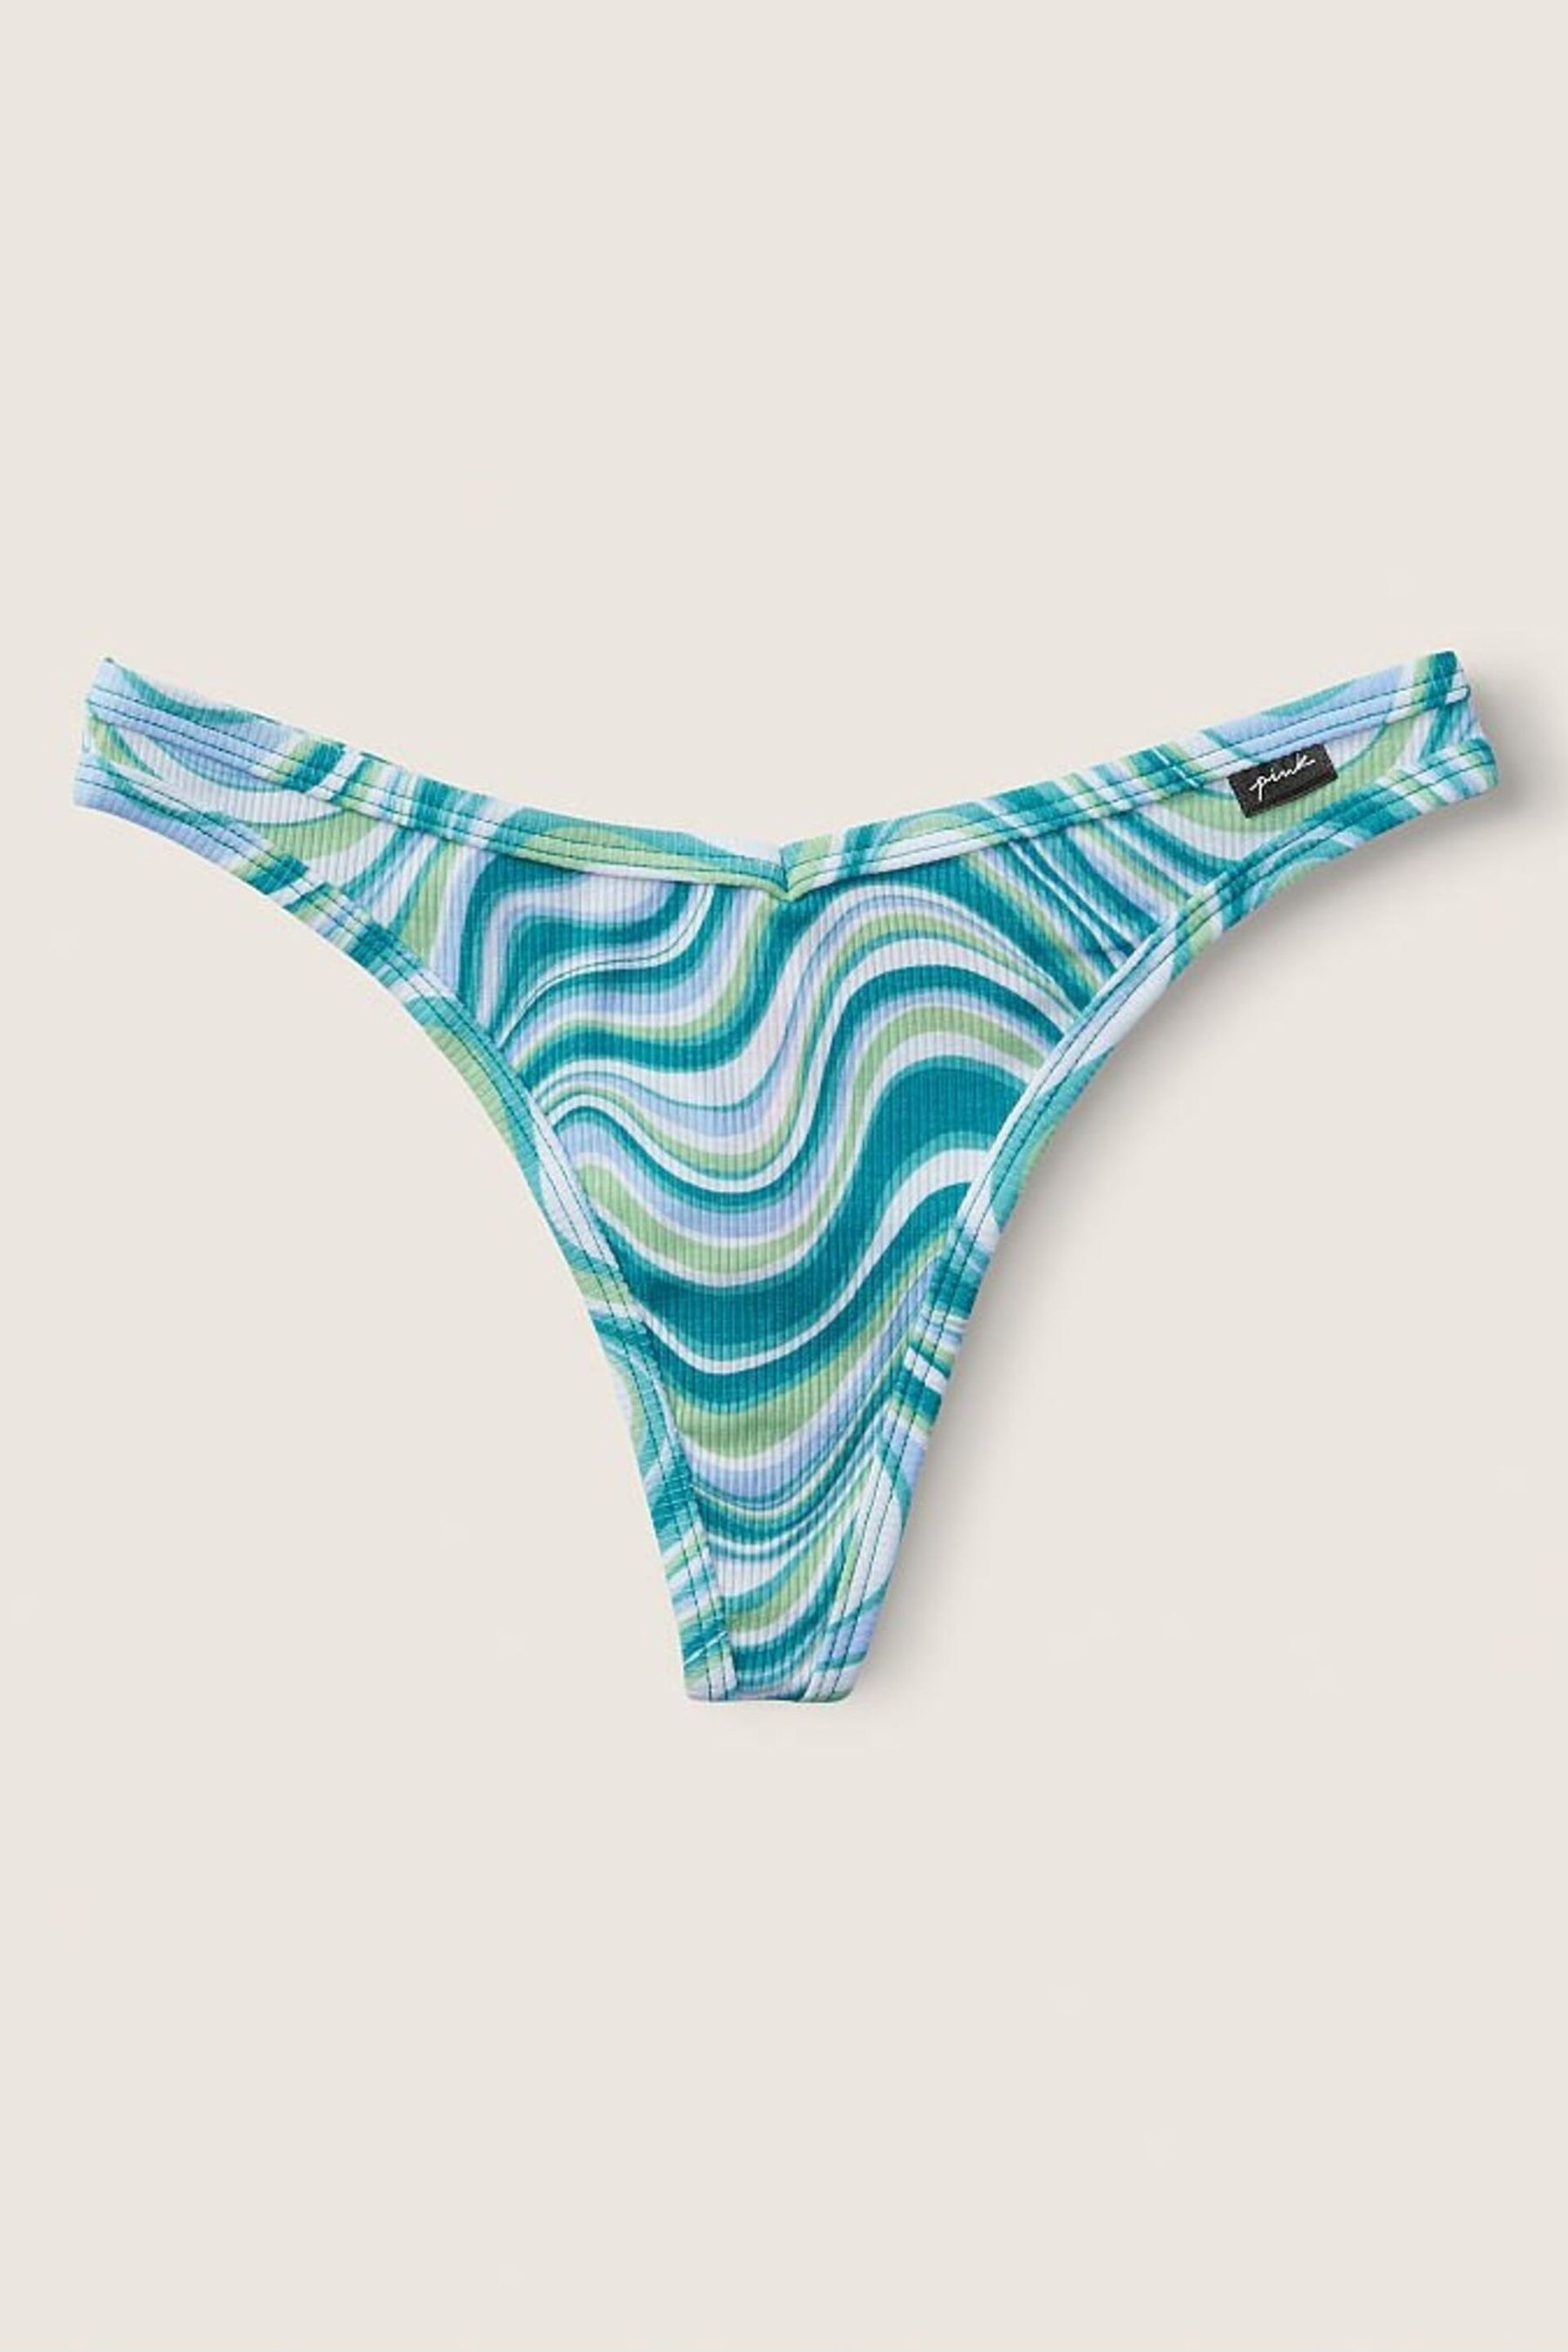 Victoria's Secret PINK Water Park Marble Print Cotton Thong Knickers - Image 1 of 1